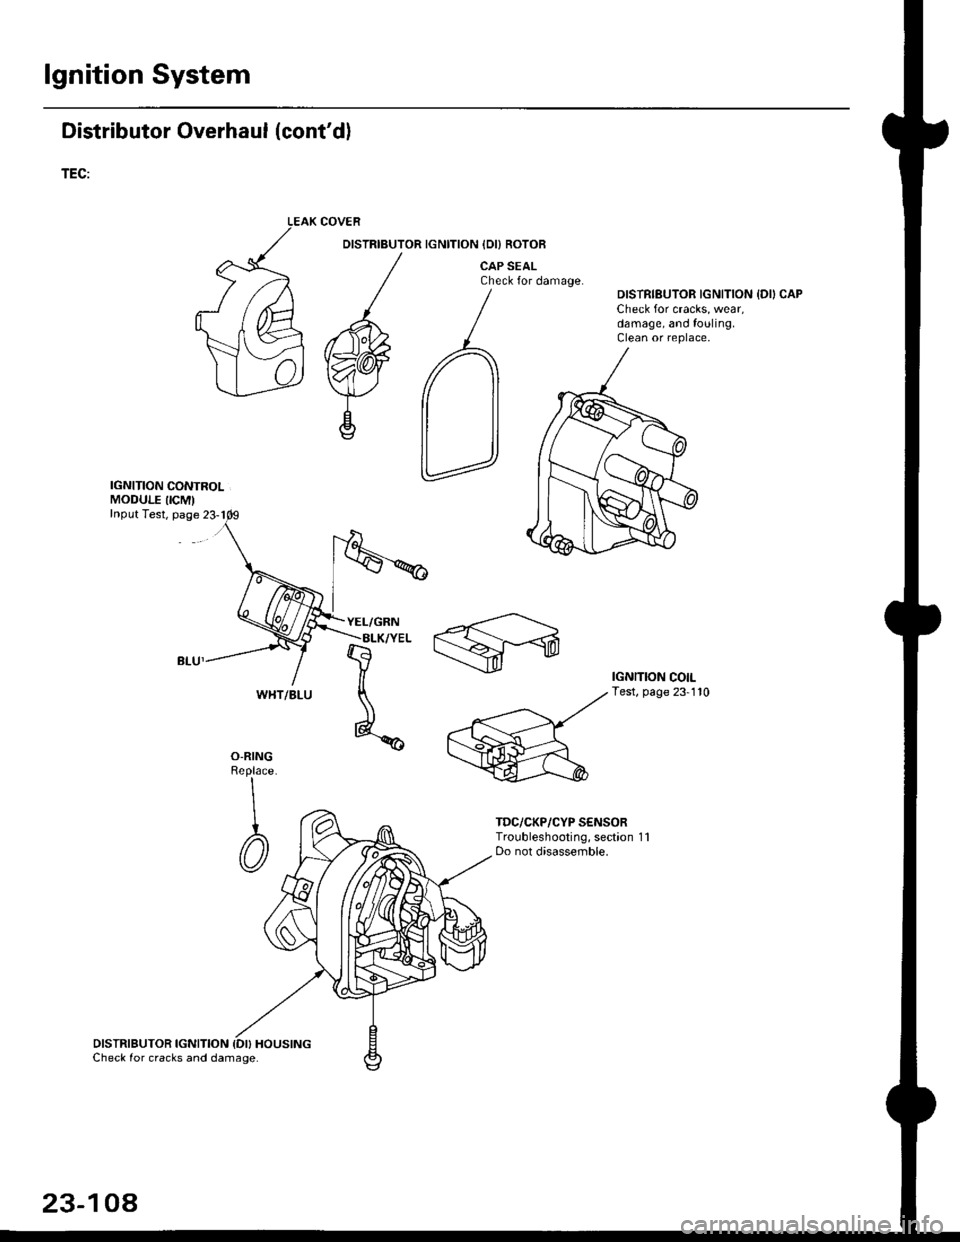 HONDA CIVIC 1996 6.G User Guide lgnition System
Distributor Overhaul (contdl
TEC:
IGNITION CONTROLMODULE IICMInput Test, page 23-1
DISTRIBUTOR IGNITION {DI} HOUSINGCheck for cracks and damage.
COVER
DISTRIBUTOR IGNITION IDI) ROTOB